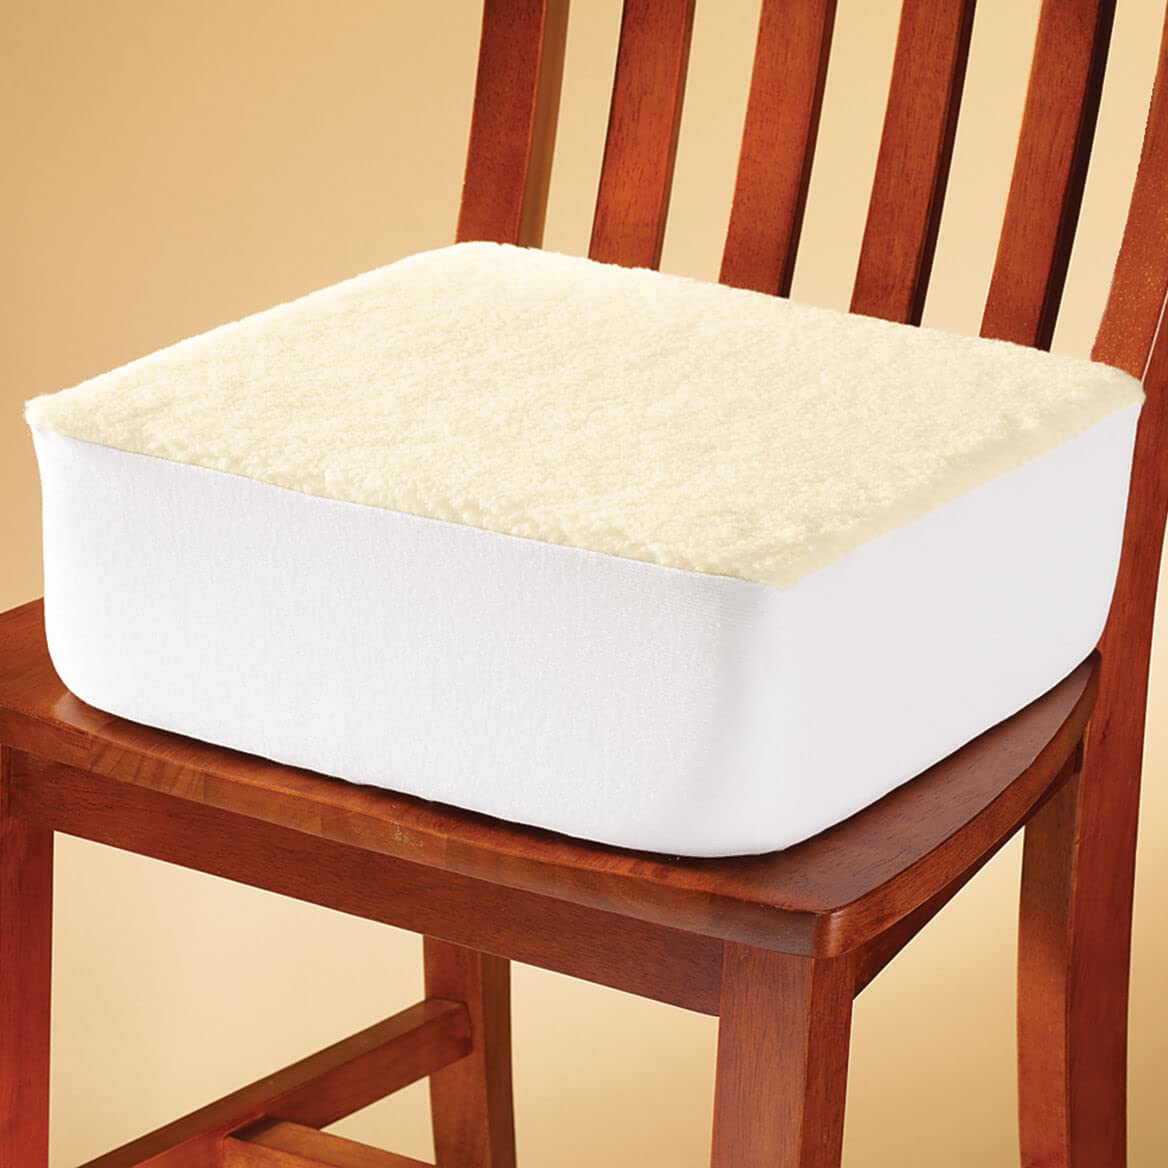 Extra Thick Foam Chair Cushion – Large Portable Chair Pad with Removable and Washable Beige Slip-on Cover – 5 Inches Thick for Added Pain and Pressure Relief